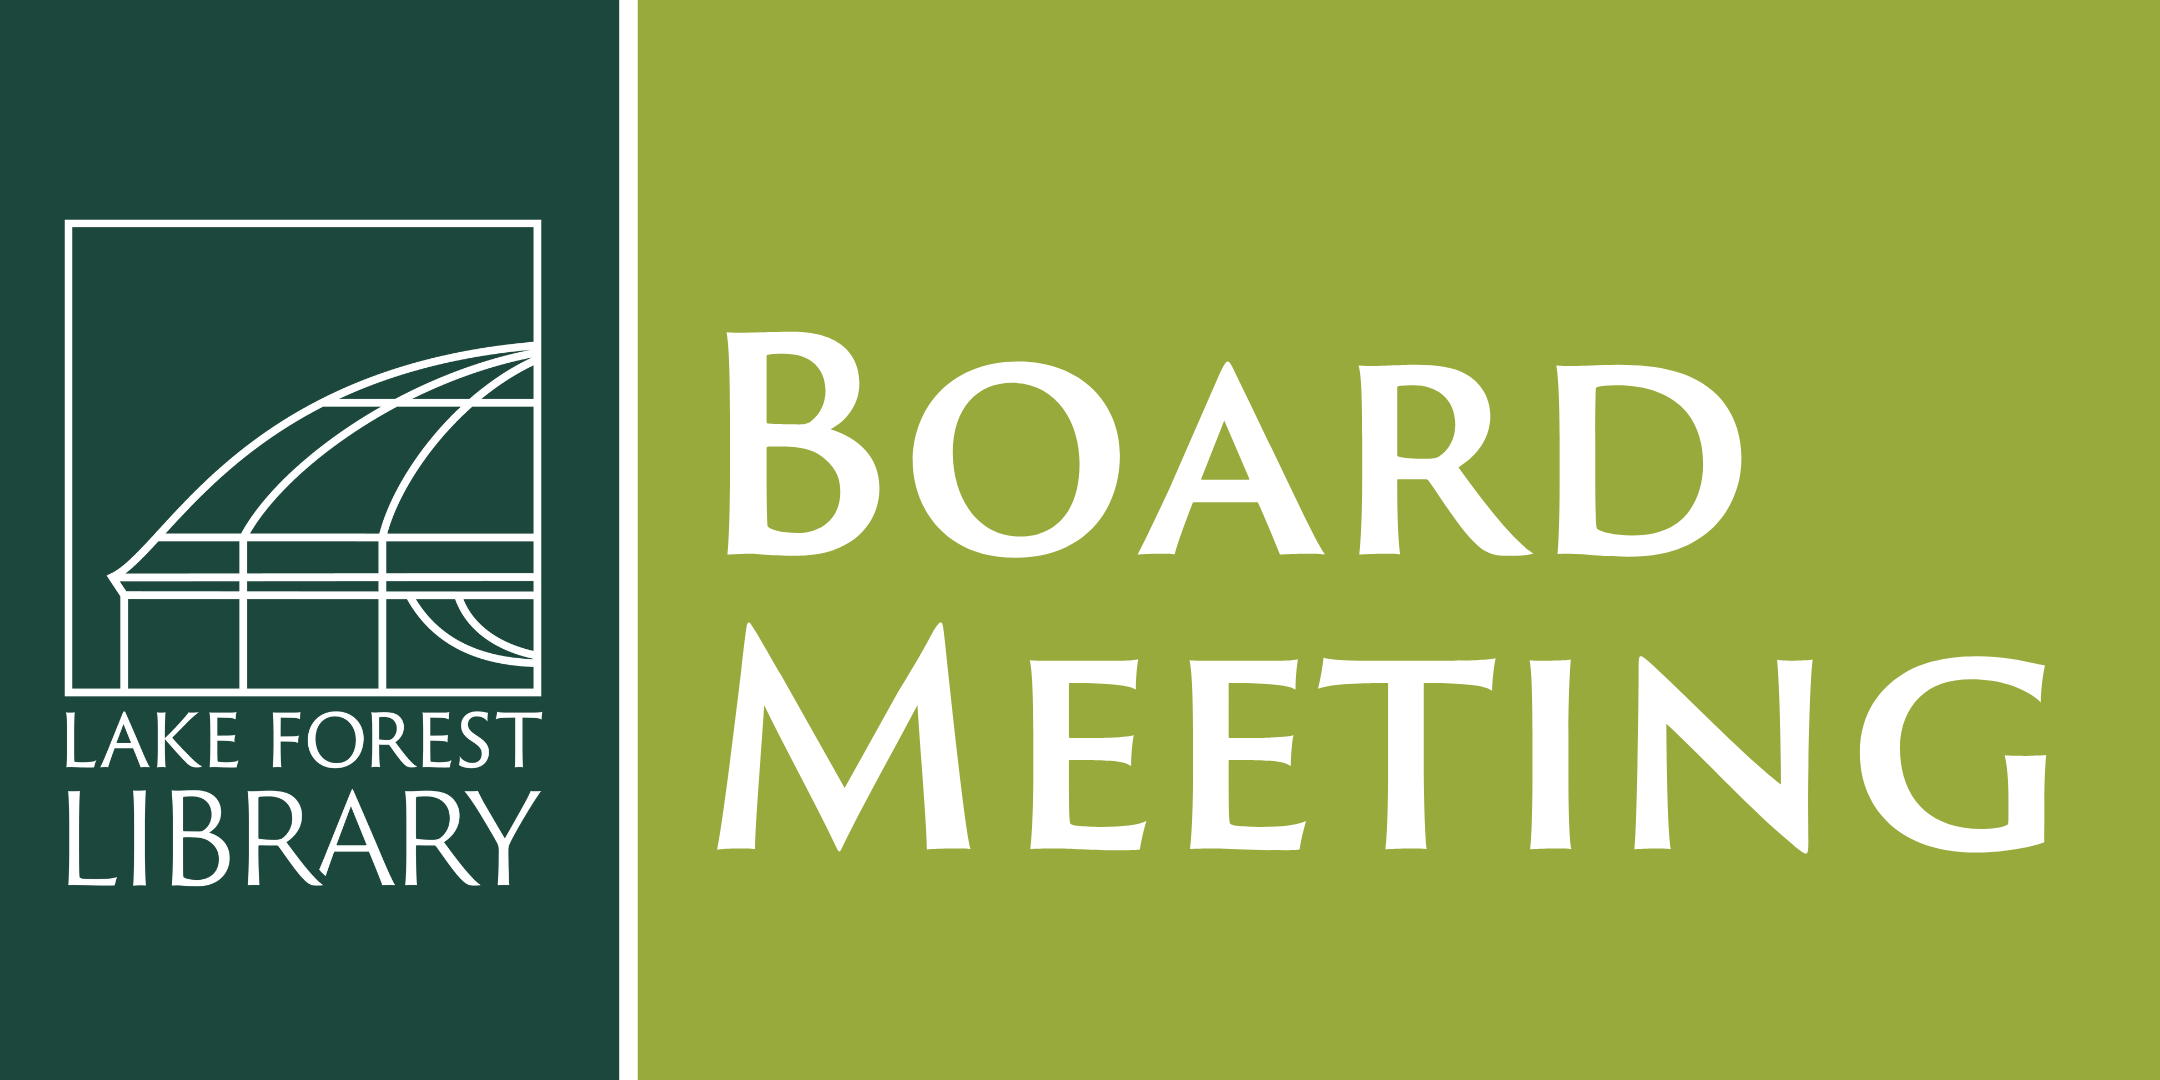 Lake Forest Library Board Meeting